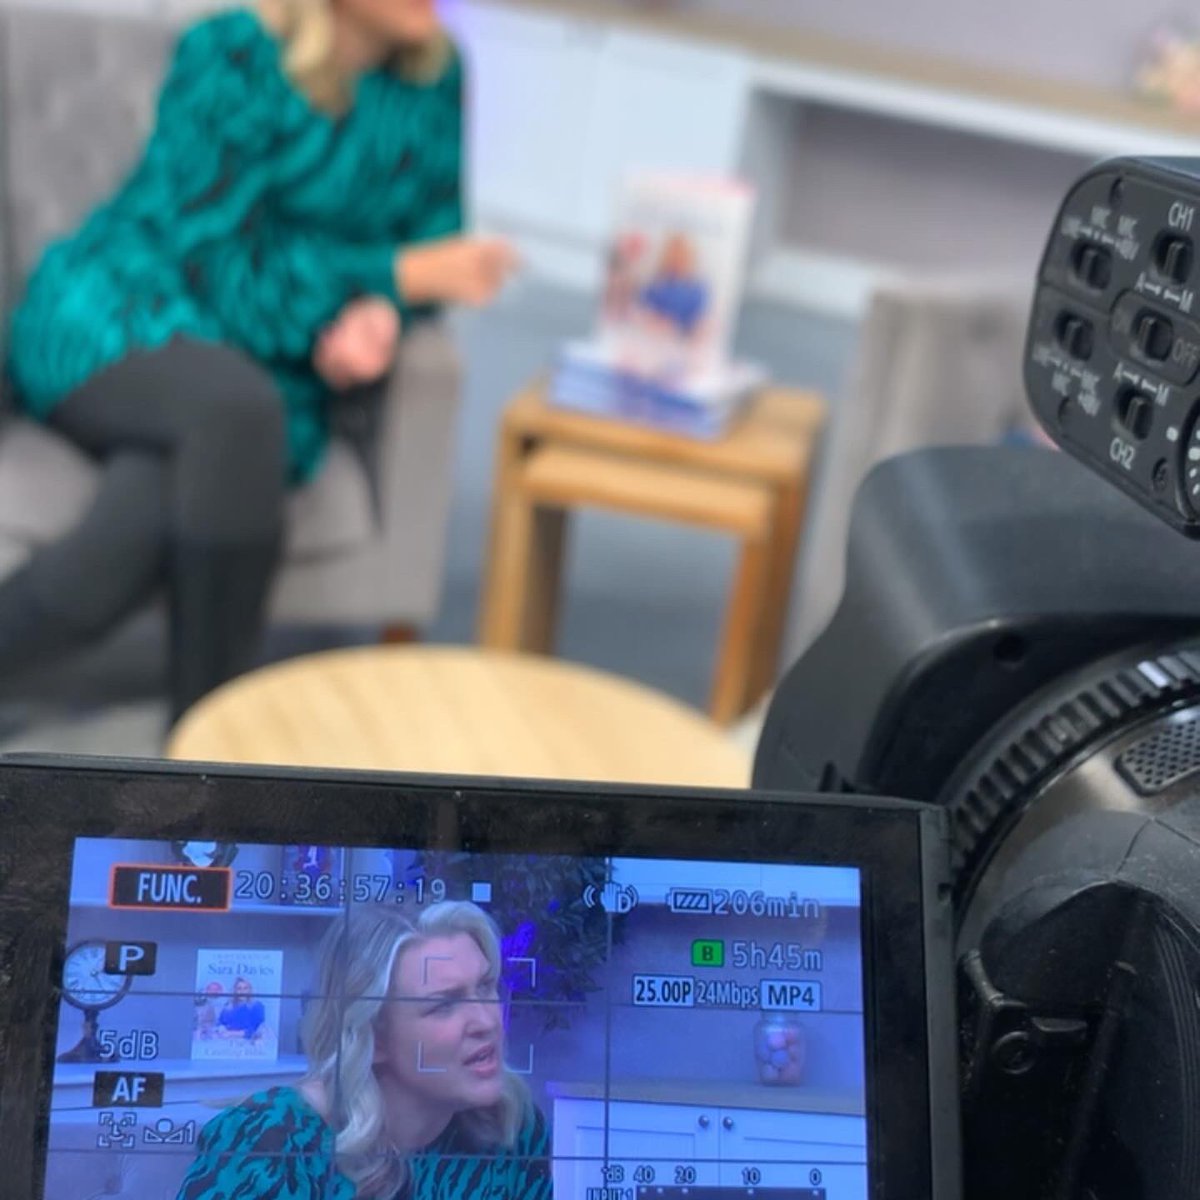 Fun afternoon shooting for the Invite Only Podcast with local dragon and craft queen Sara Davies 🎥 
.
.
.
.
.
.
.
#craftqueen @crafterscompanion #inviteonlypodcast #onset #northeasttalent #dragonsden #instafashion #instamood #fridayvibes #fridaymotivation #tvstudio #producer